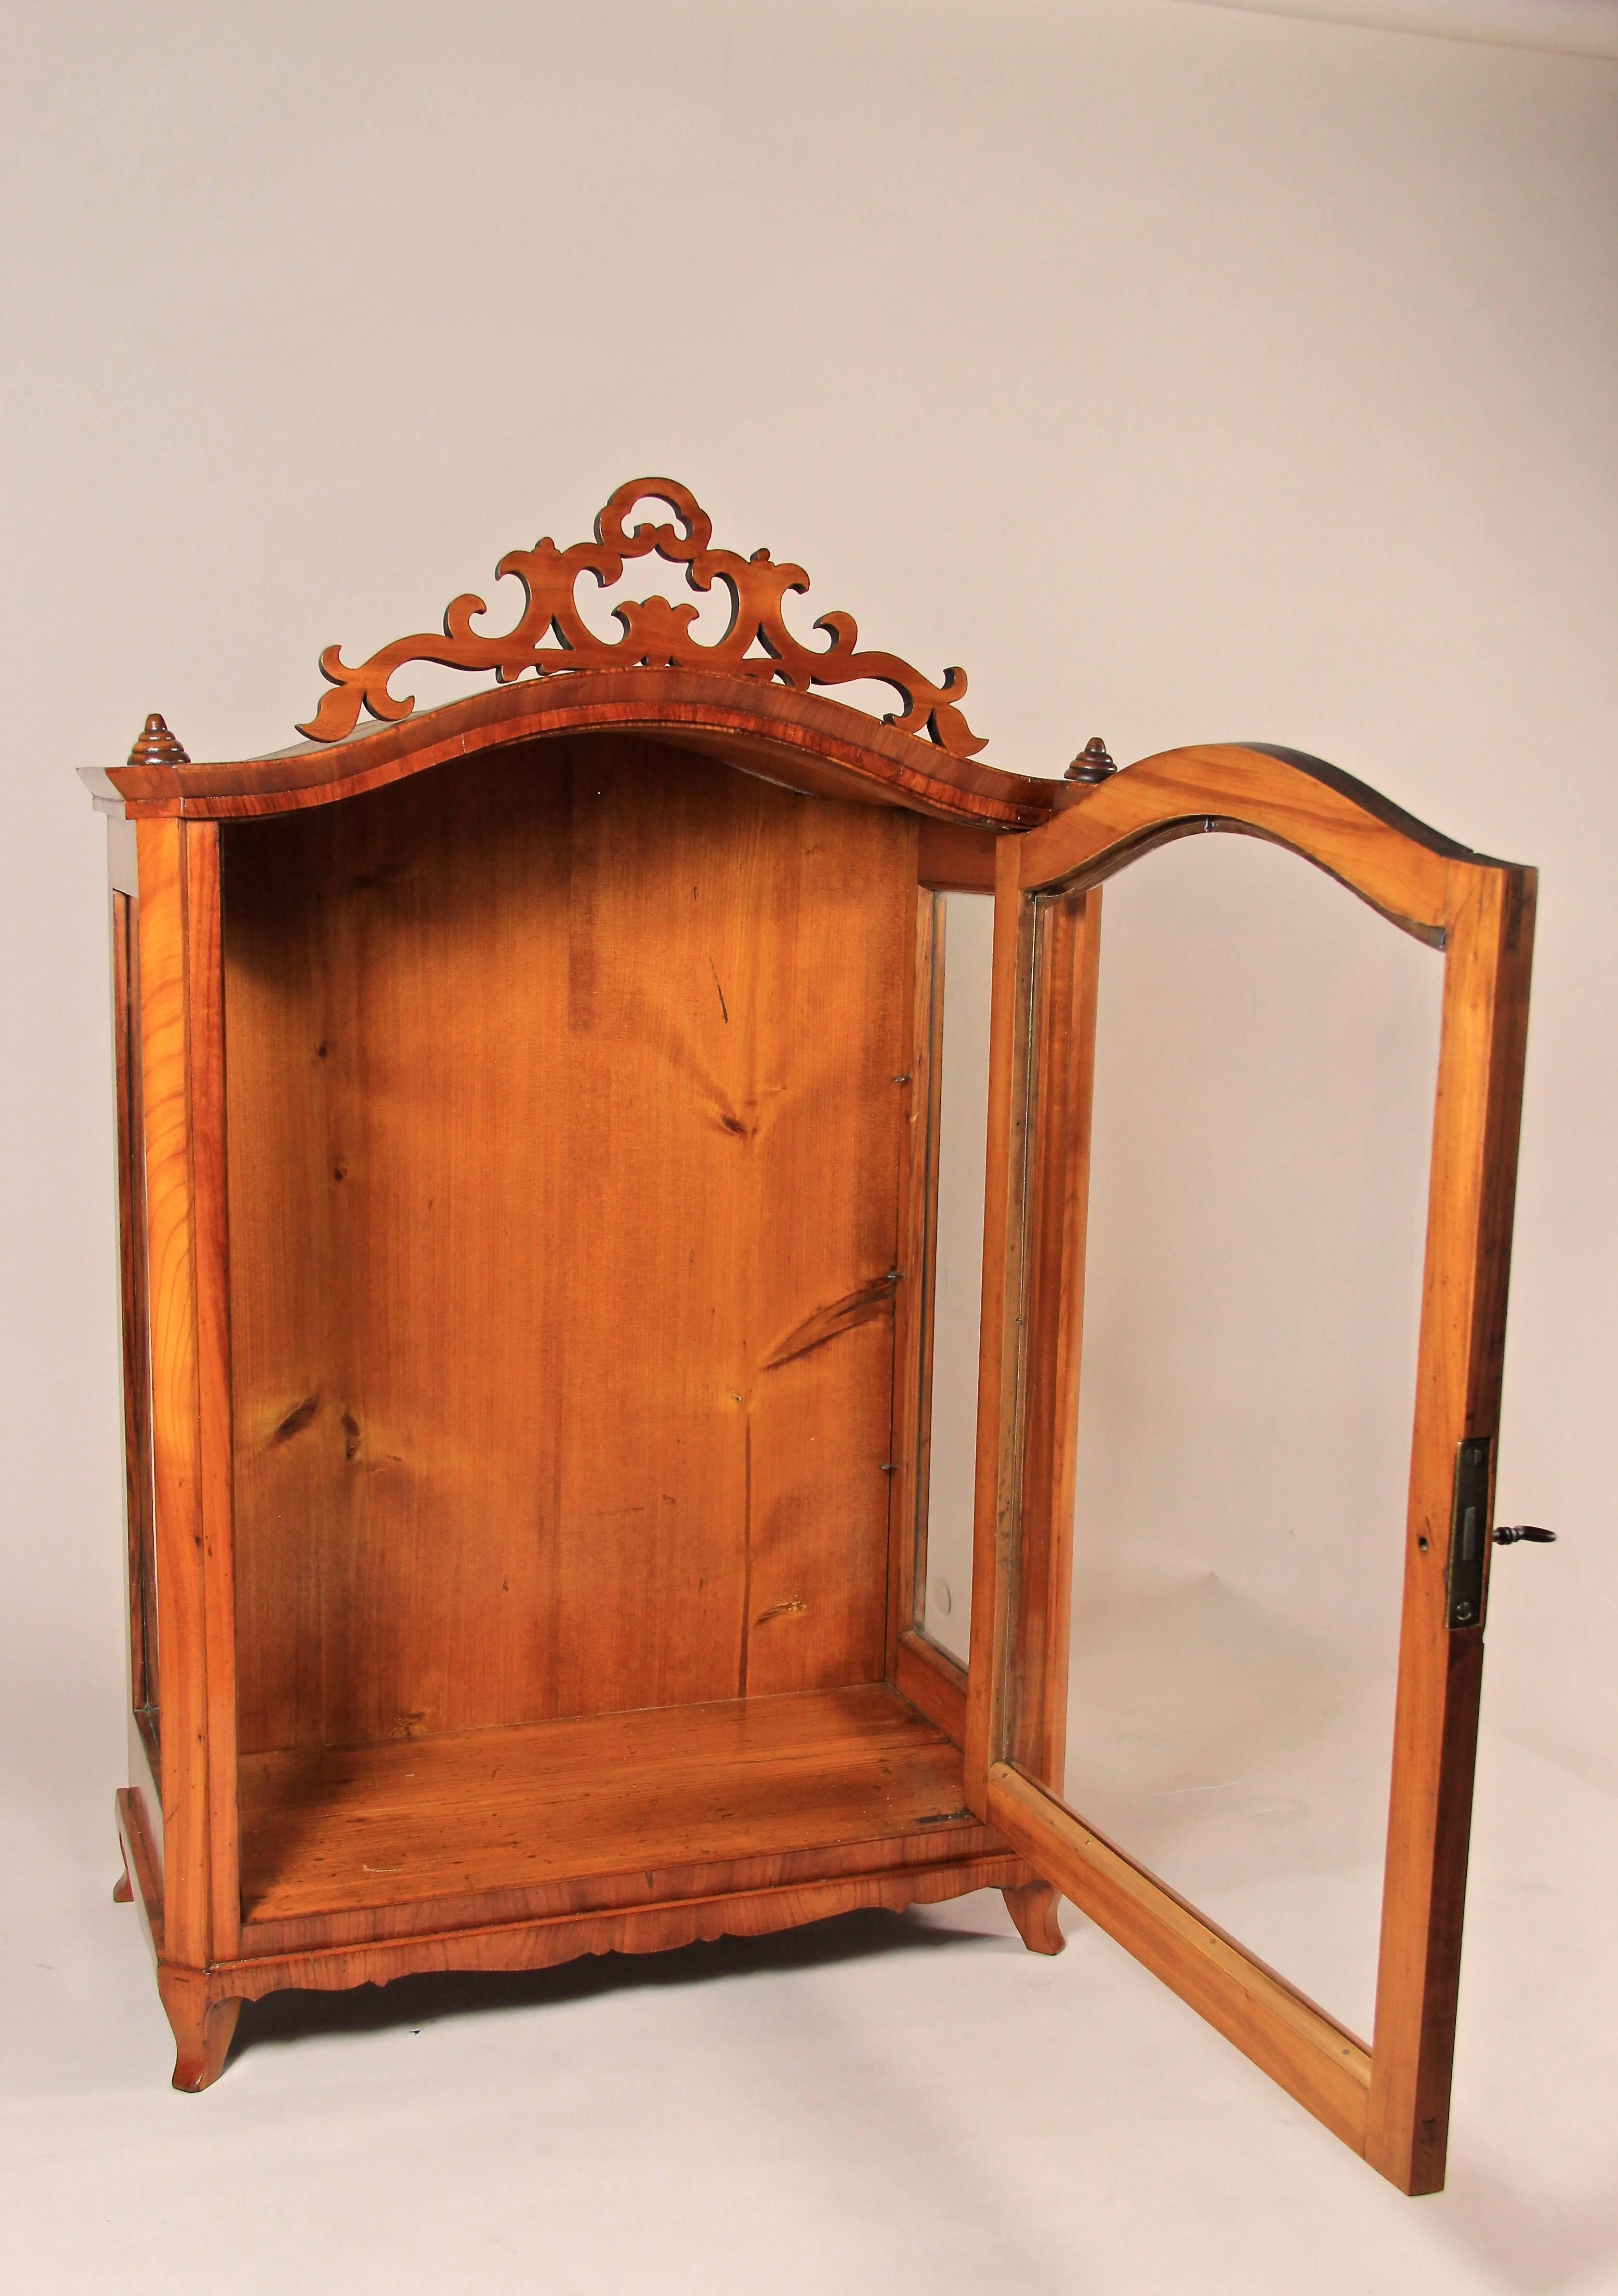 A very decorative smaller table vitrine or display cabinet from the later Biedermeier period circa 1860. Finest cherrywood veneer was used to build this amazing display cabinet, which is glassed on three sides. On top of this beautiful vitrine you